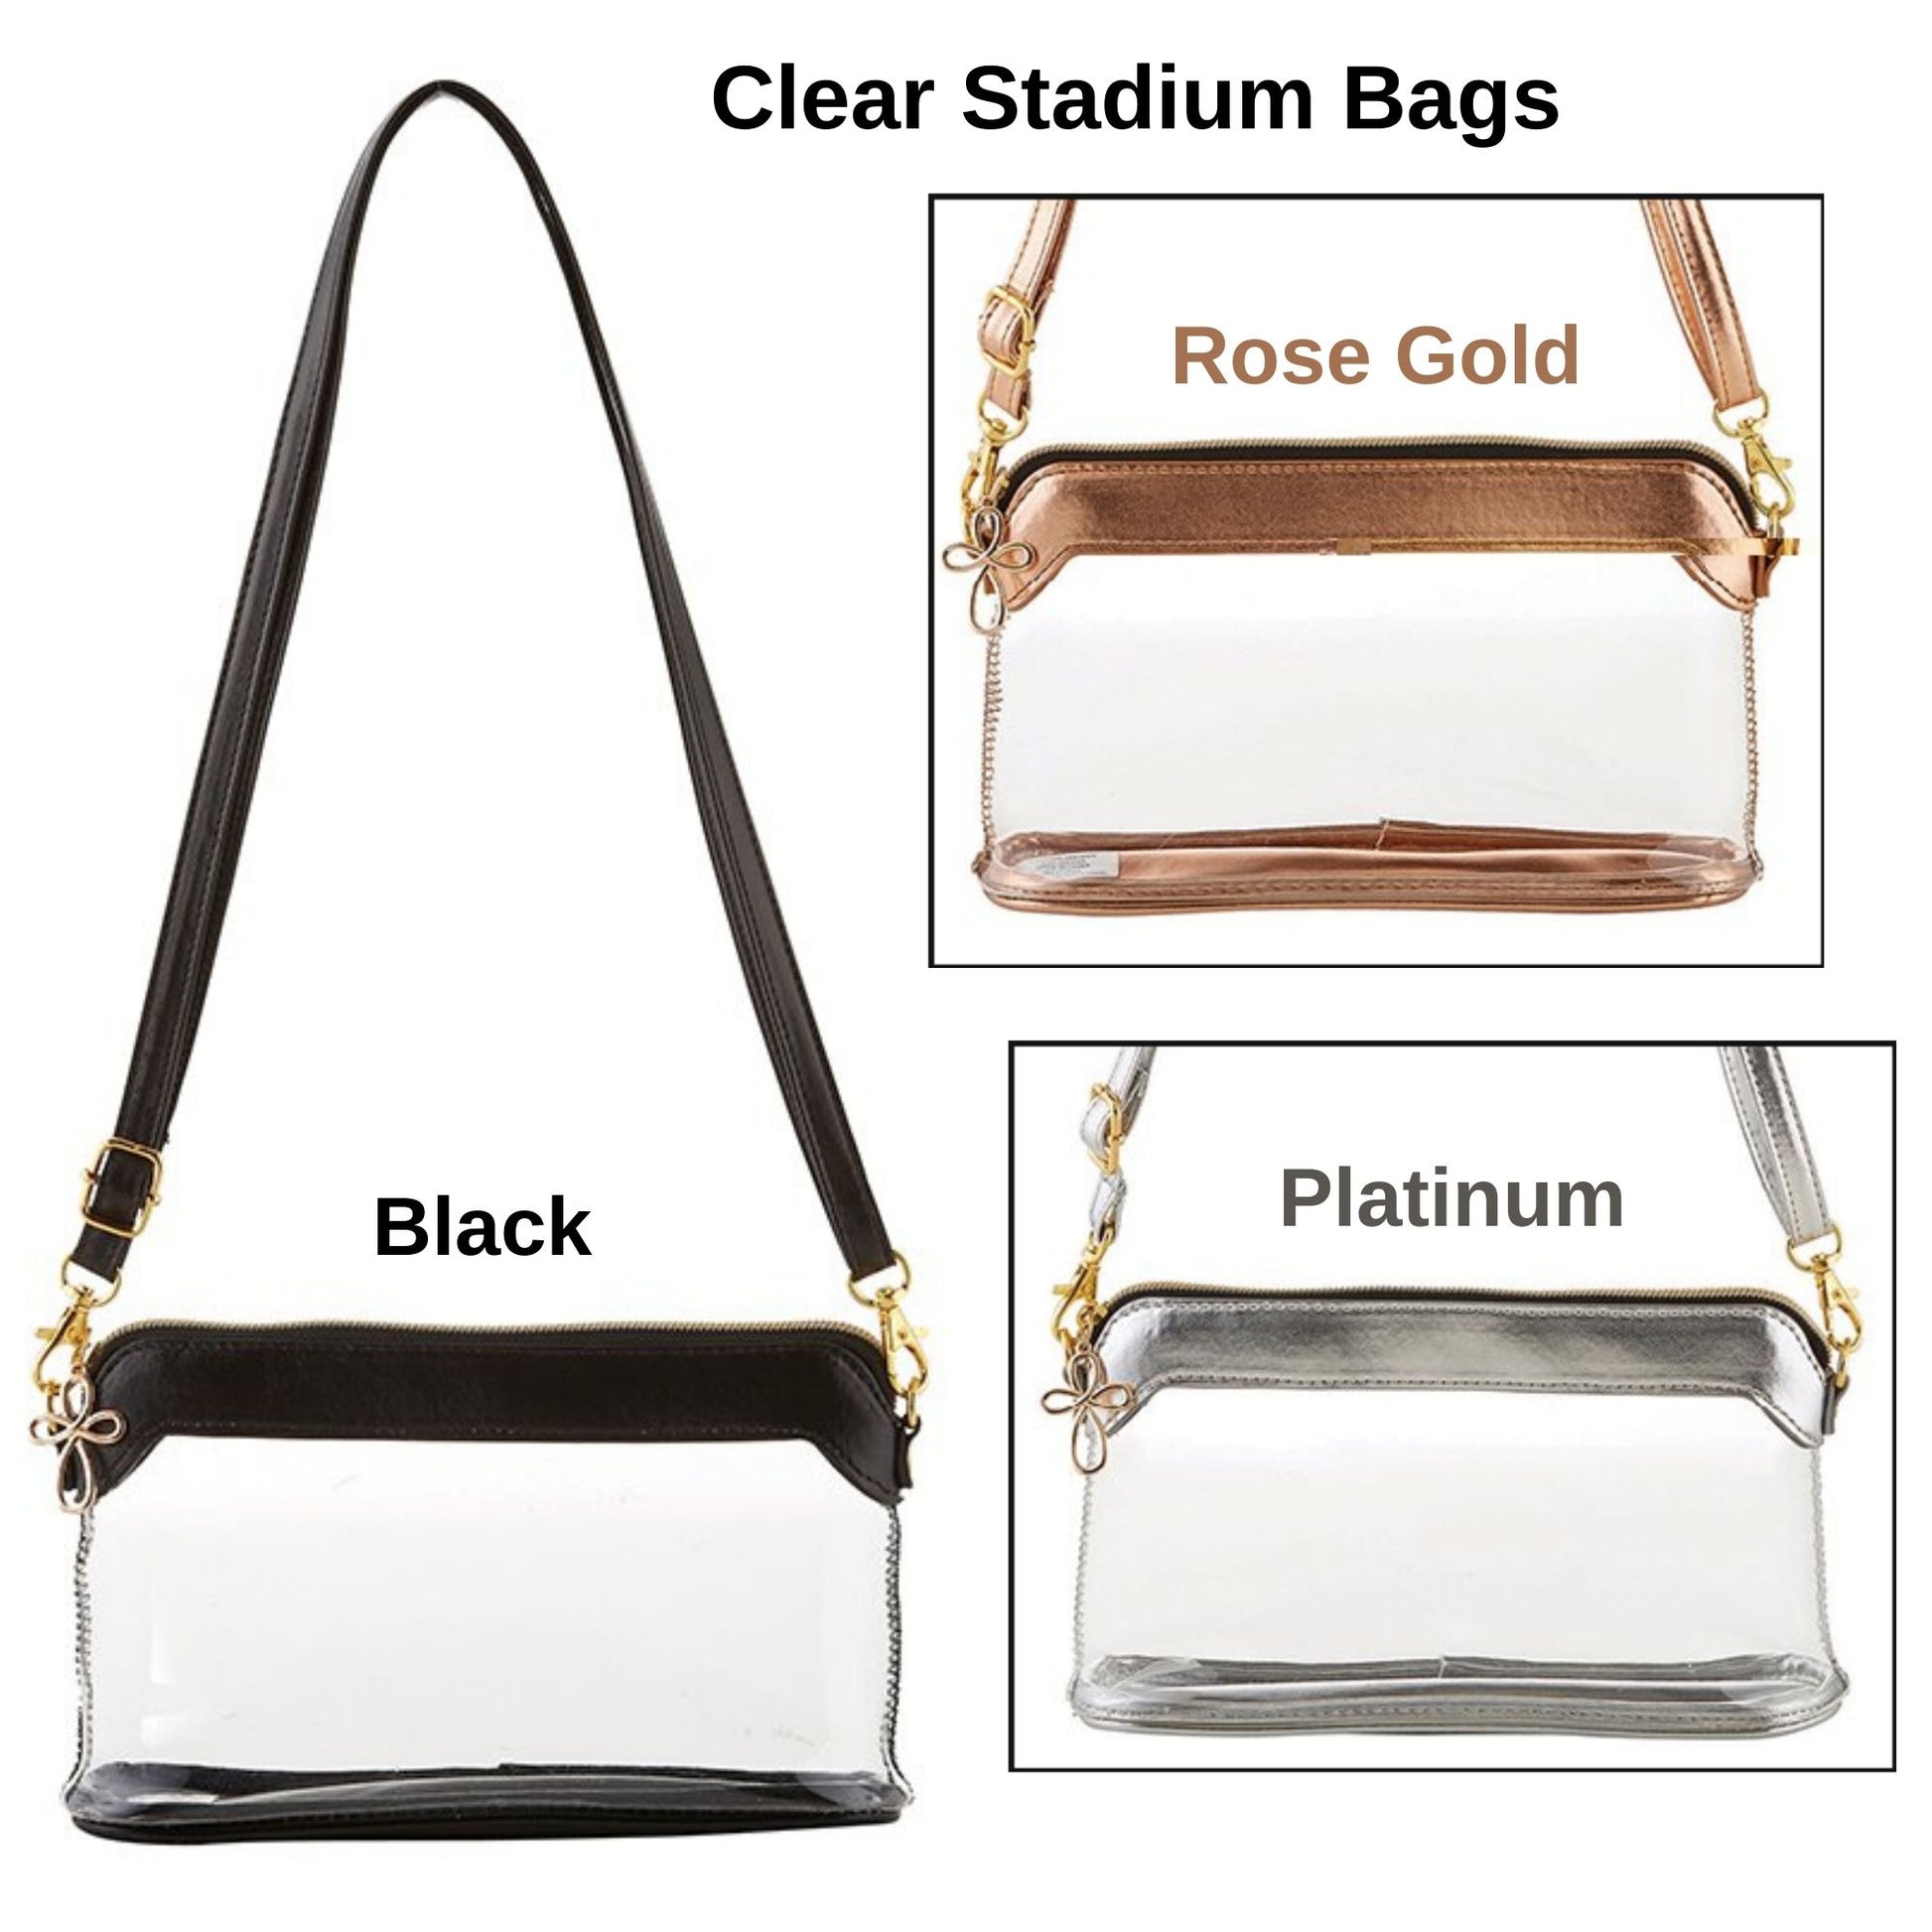 Clear Stadium Bags - Clear Purse with Strap - Clear Compliant Bag (Choose Black, Rose Gold, or Platinum) | oak7west.com